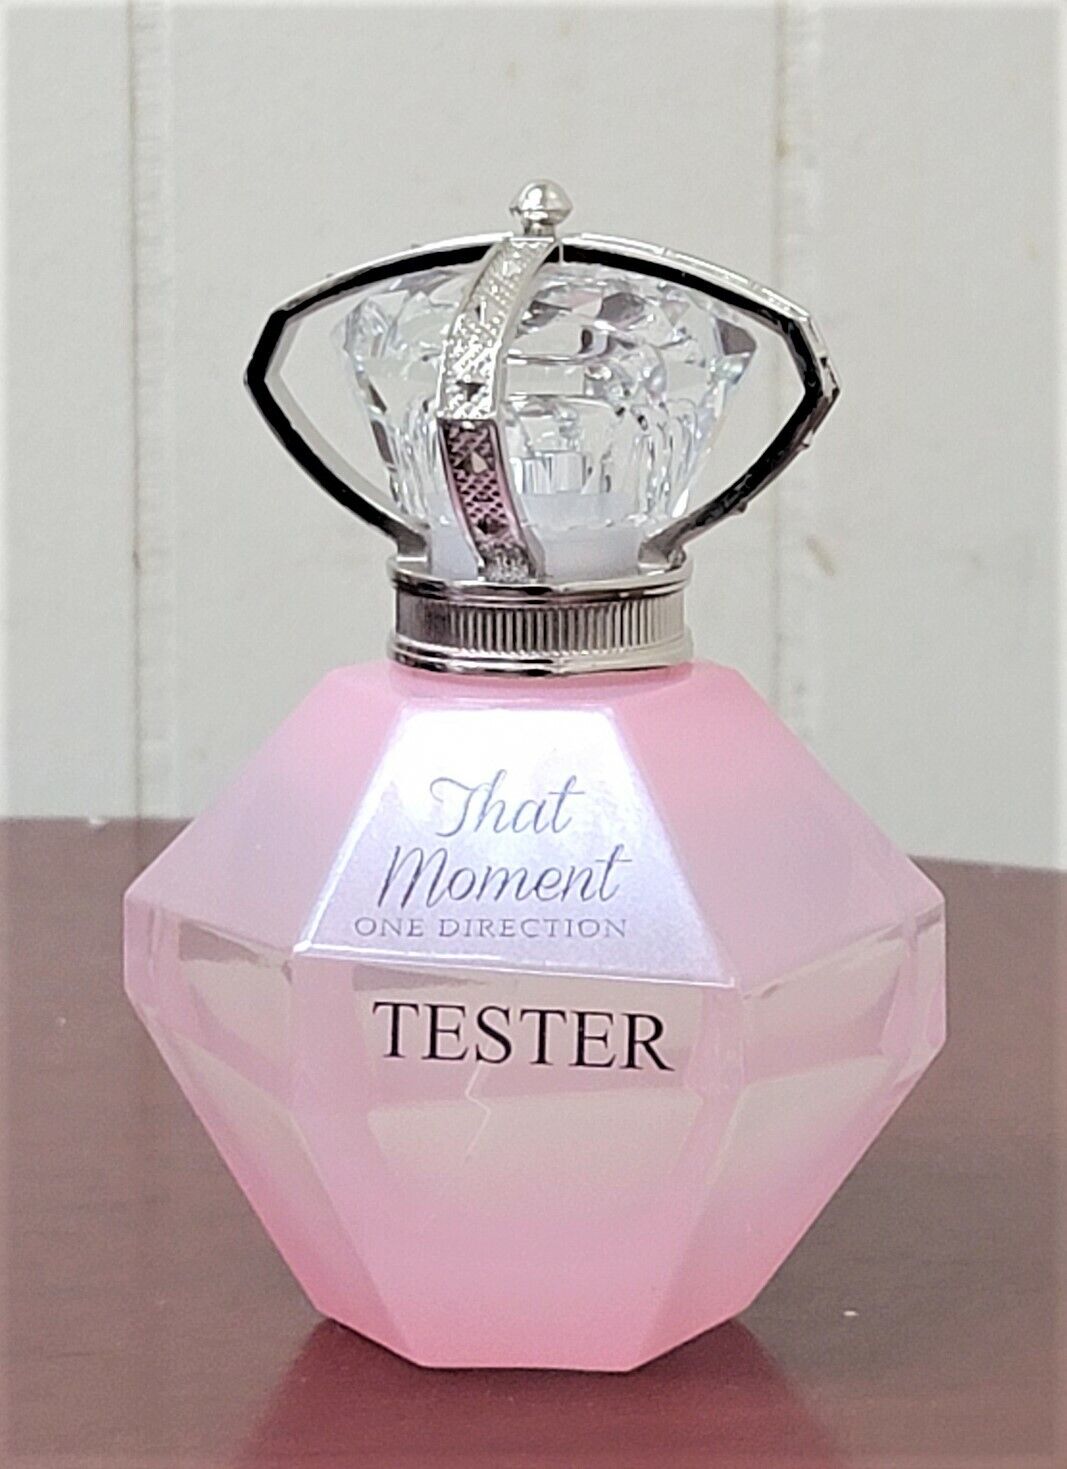 That Moment by One Direction 3.4 oz / 100 ml edp spray perfume for women femme 